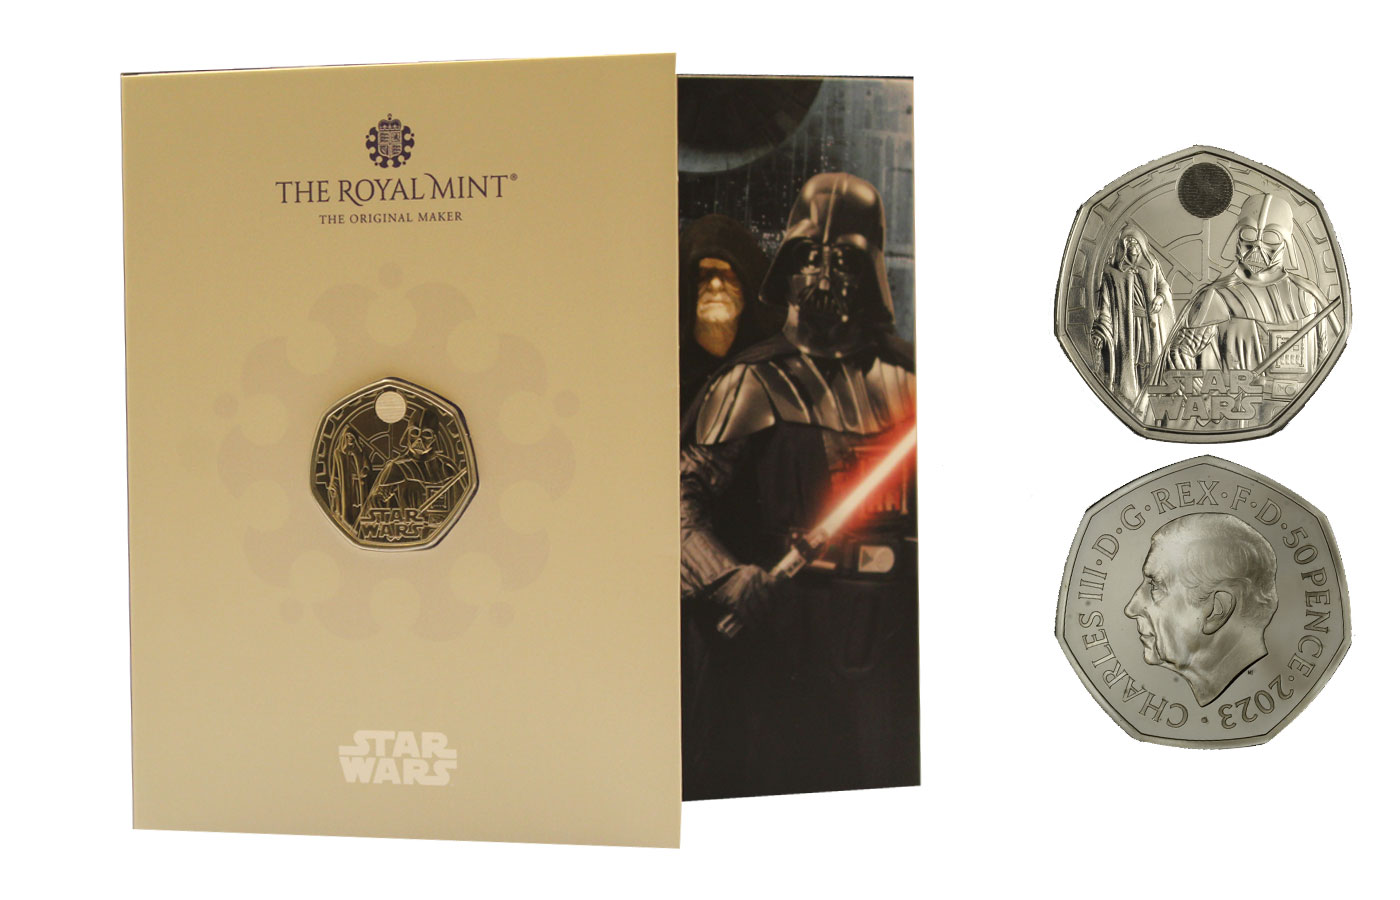 "Star Wars - Darth Vader e Imperatore Palpatine" - 50 pence in nickel